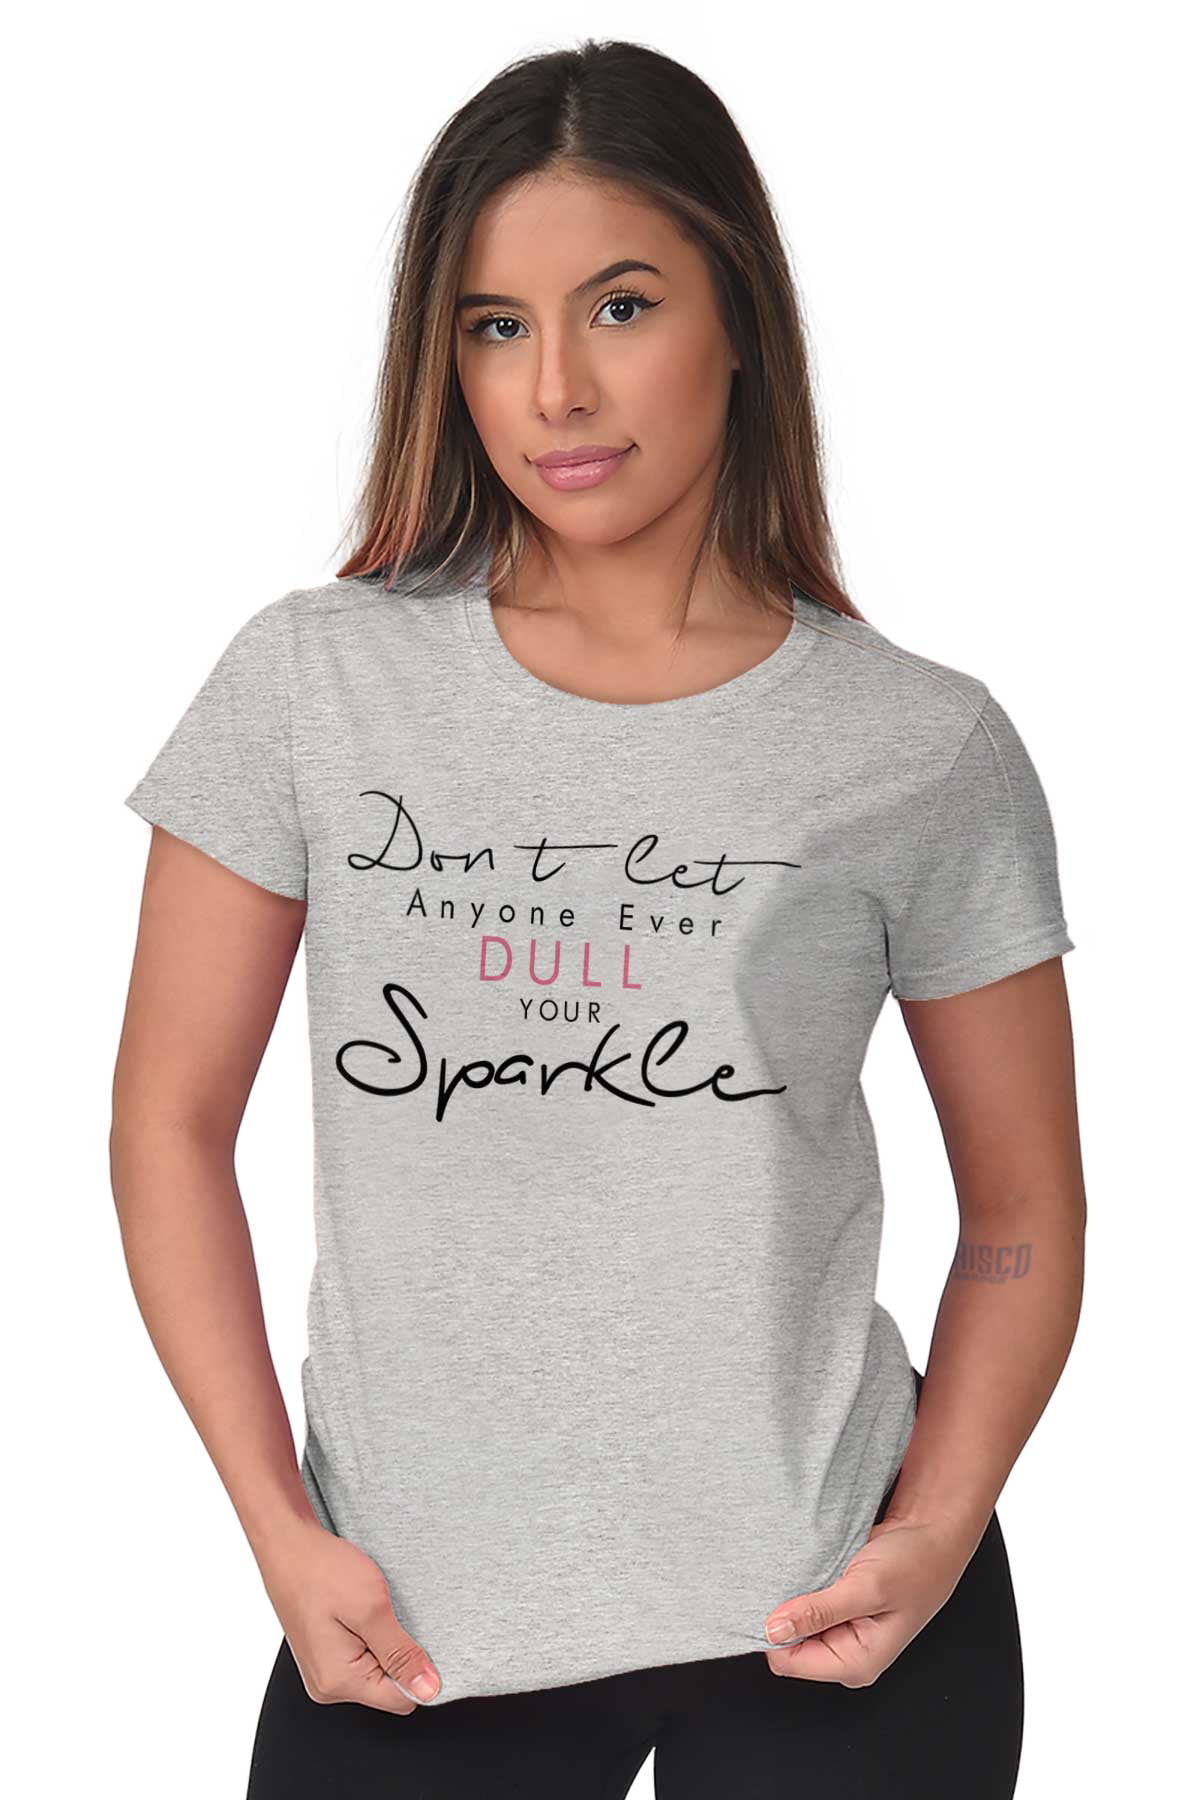 Inspirational Shirt Teacher tee Motivational shirts Encouragement T-Shirts Gift for her Never Let Anyone Dull Your Sparkle Shirt